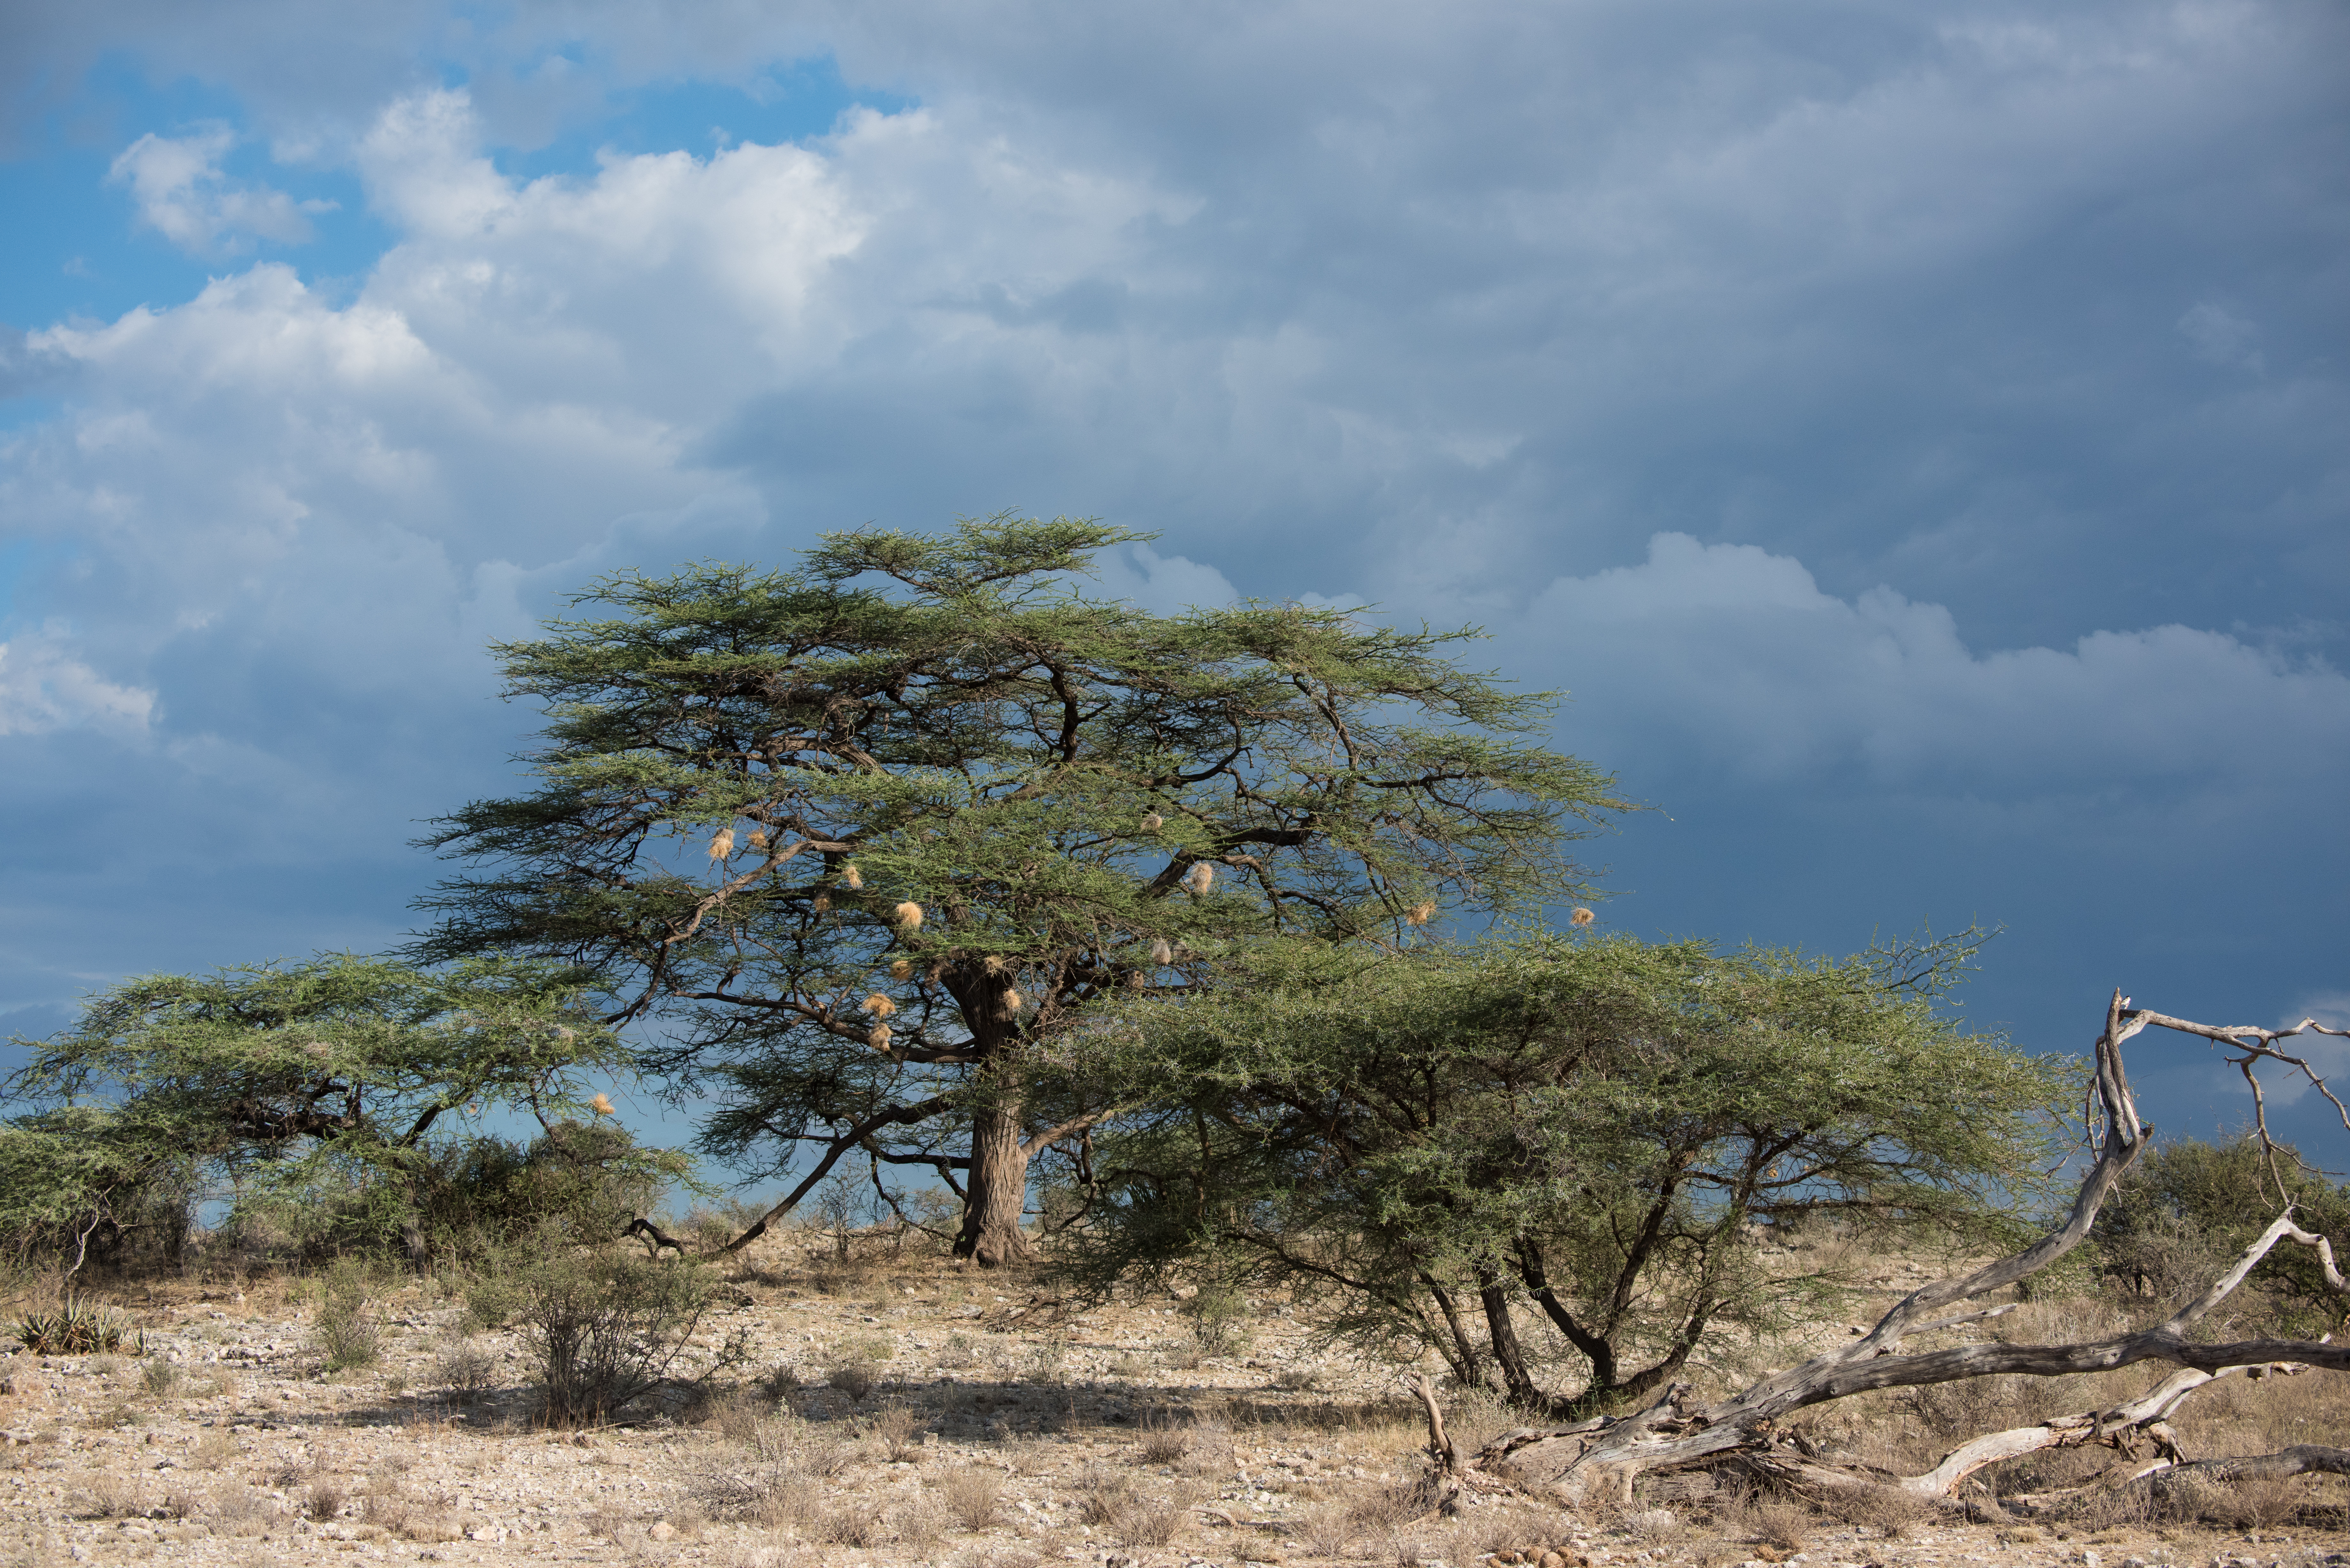 Acacia tree full of weaver nests against a stormy sky